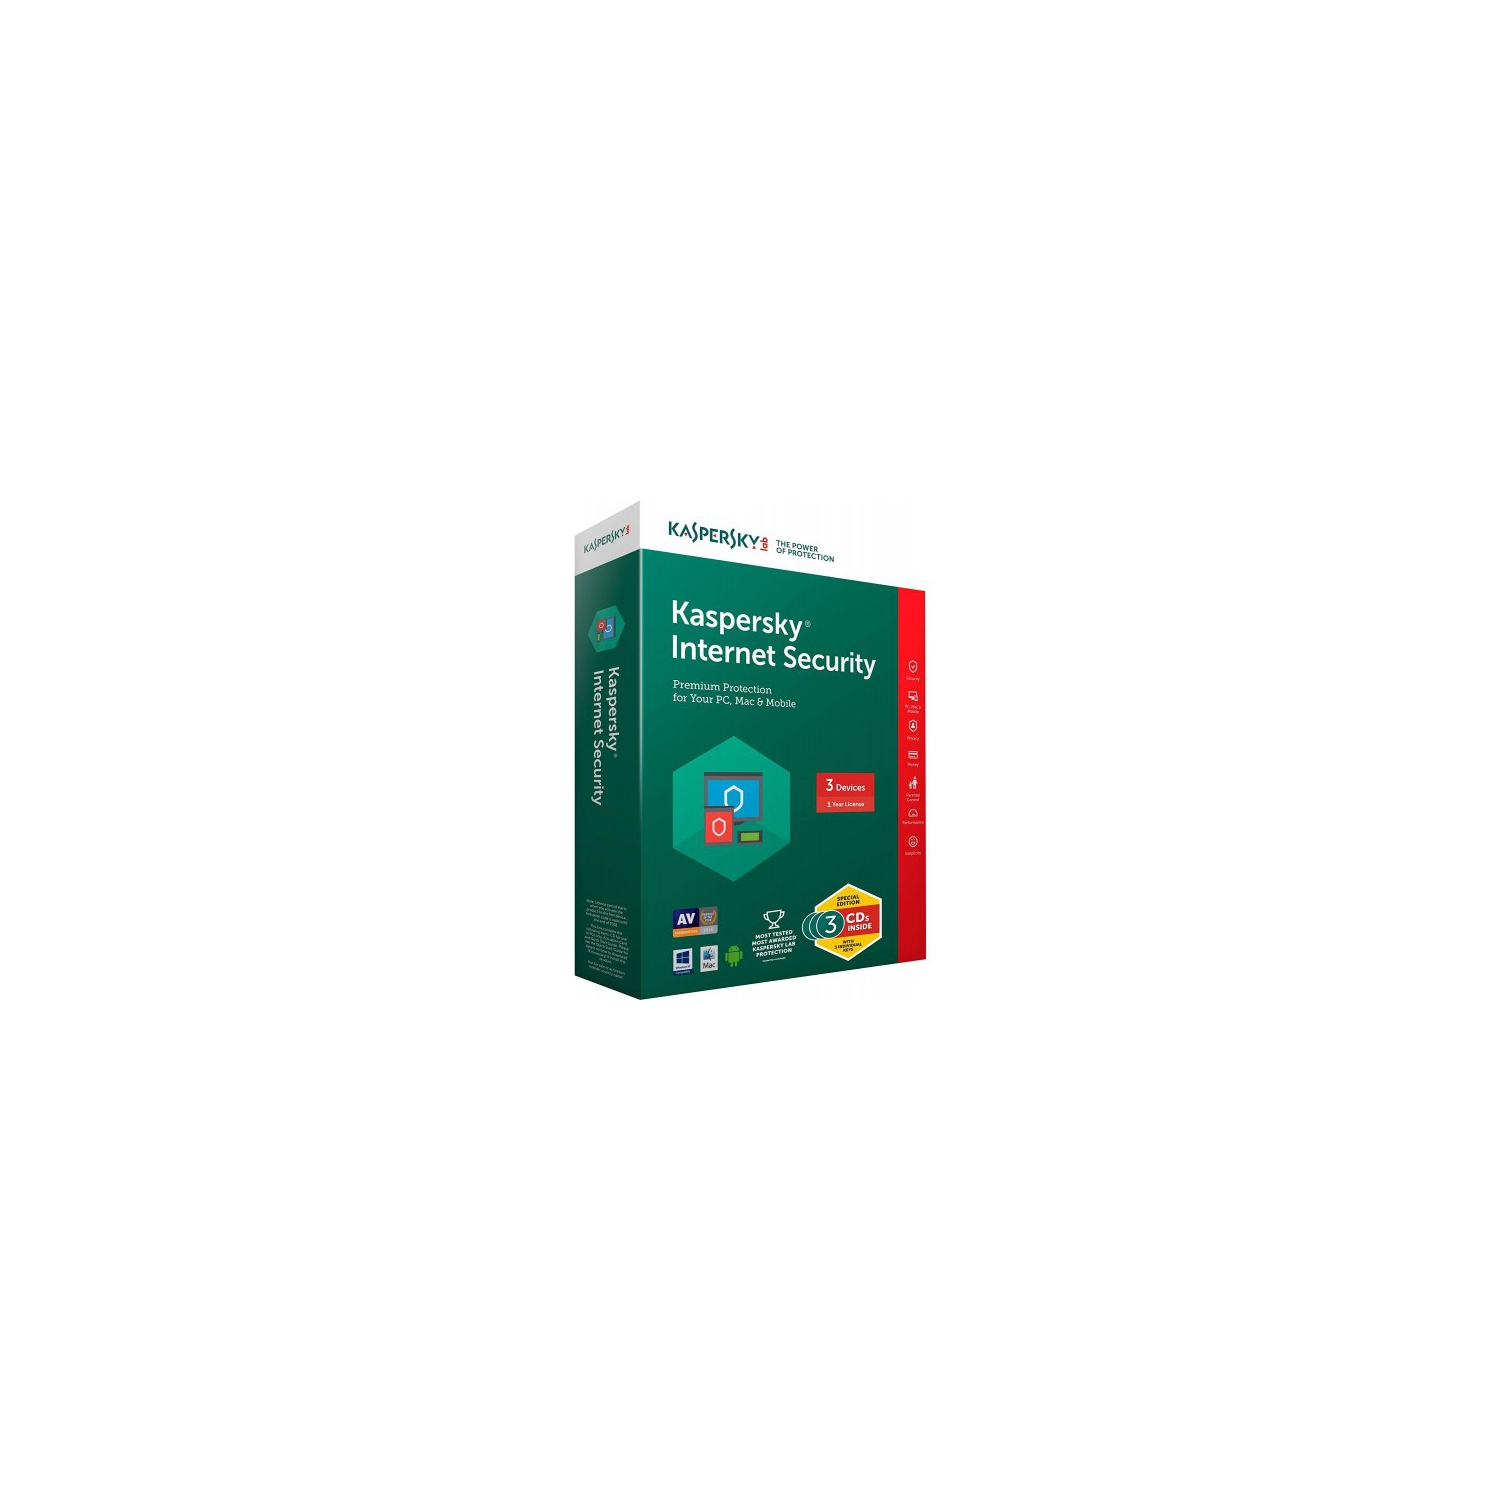 Kaspersky Internet Security 3-user, 1 year(KEY CARD ONLY)(FREE SHIPPING)